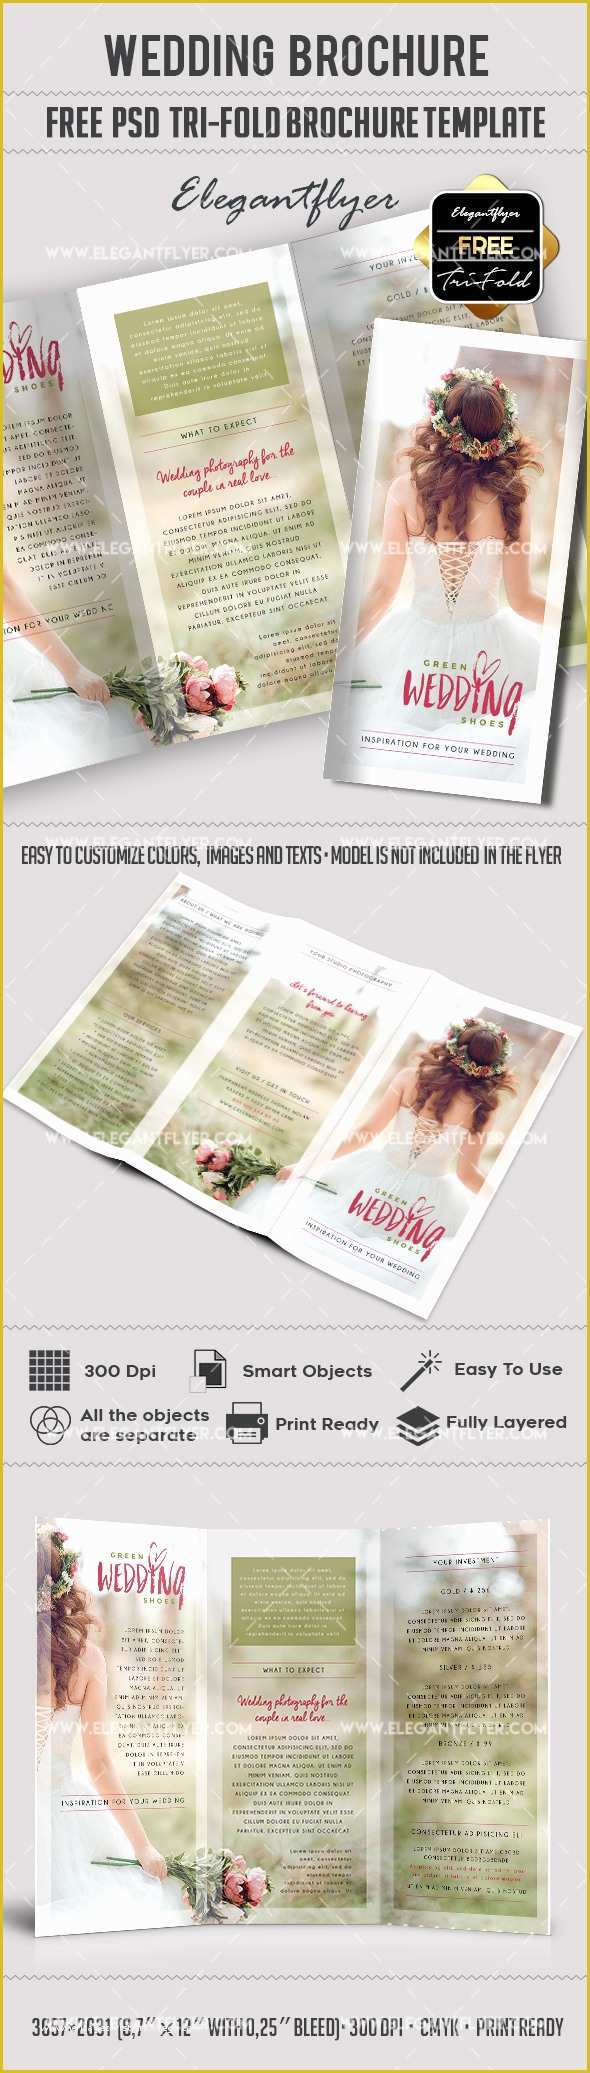 Free Funeral Flyer Template Psd Of Wedding – Free Tri Fold Psd Brochure Template – by